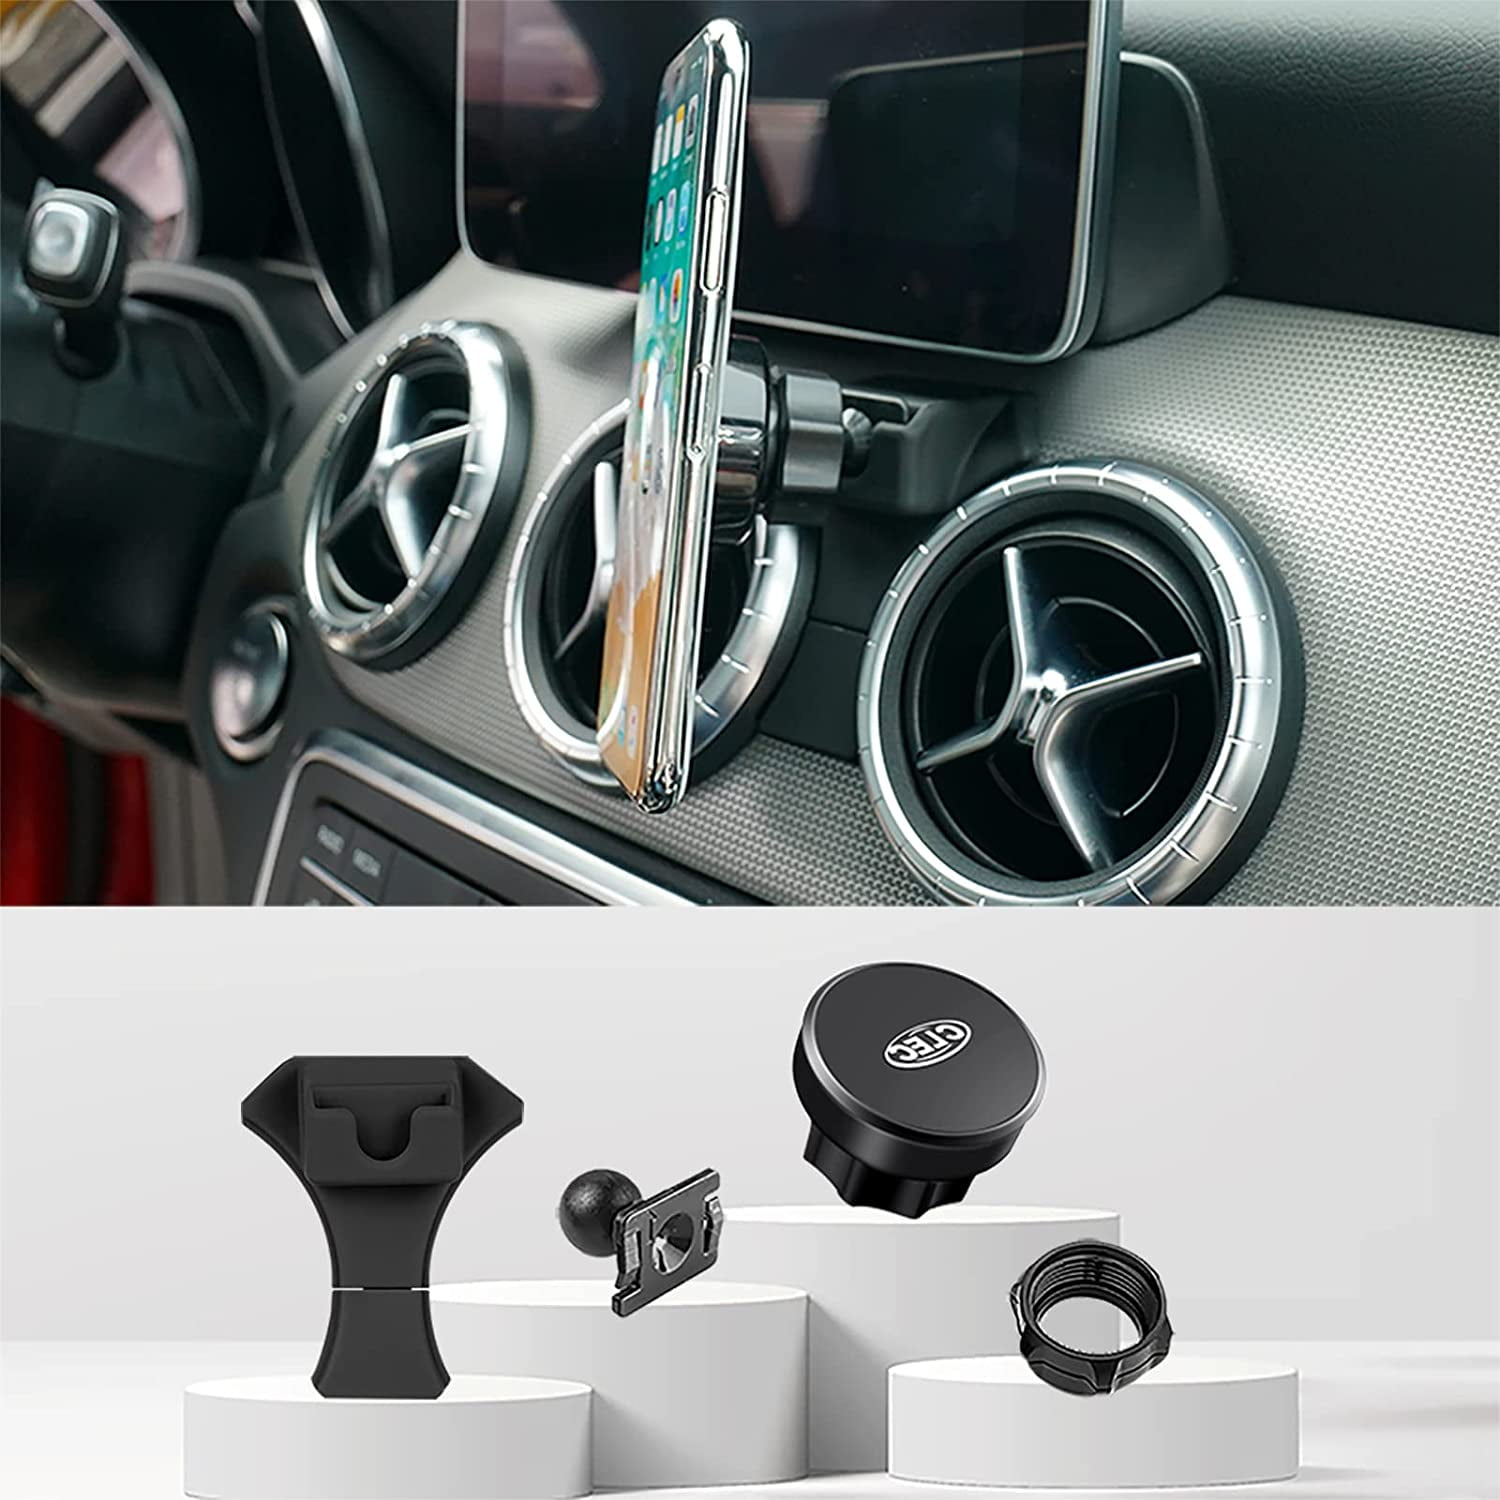  LUNQIN Car Phone Holder for 2015-2020 Mercedes Benz GLA GLA200  250 260and 2014-2018 CLA CLA220 Auto Accessories Navigation Bracket  Interior Decoration Mobile Cell Phone Mount